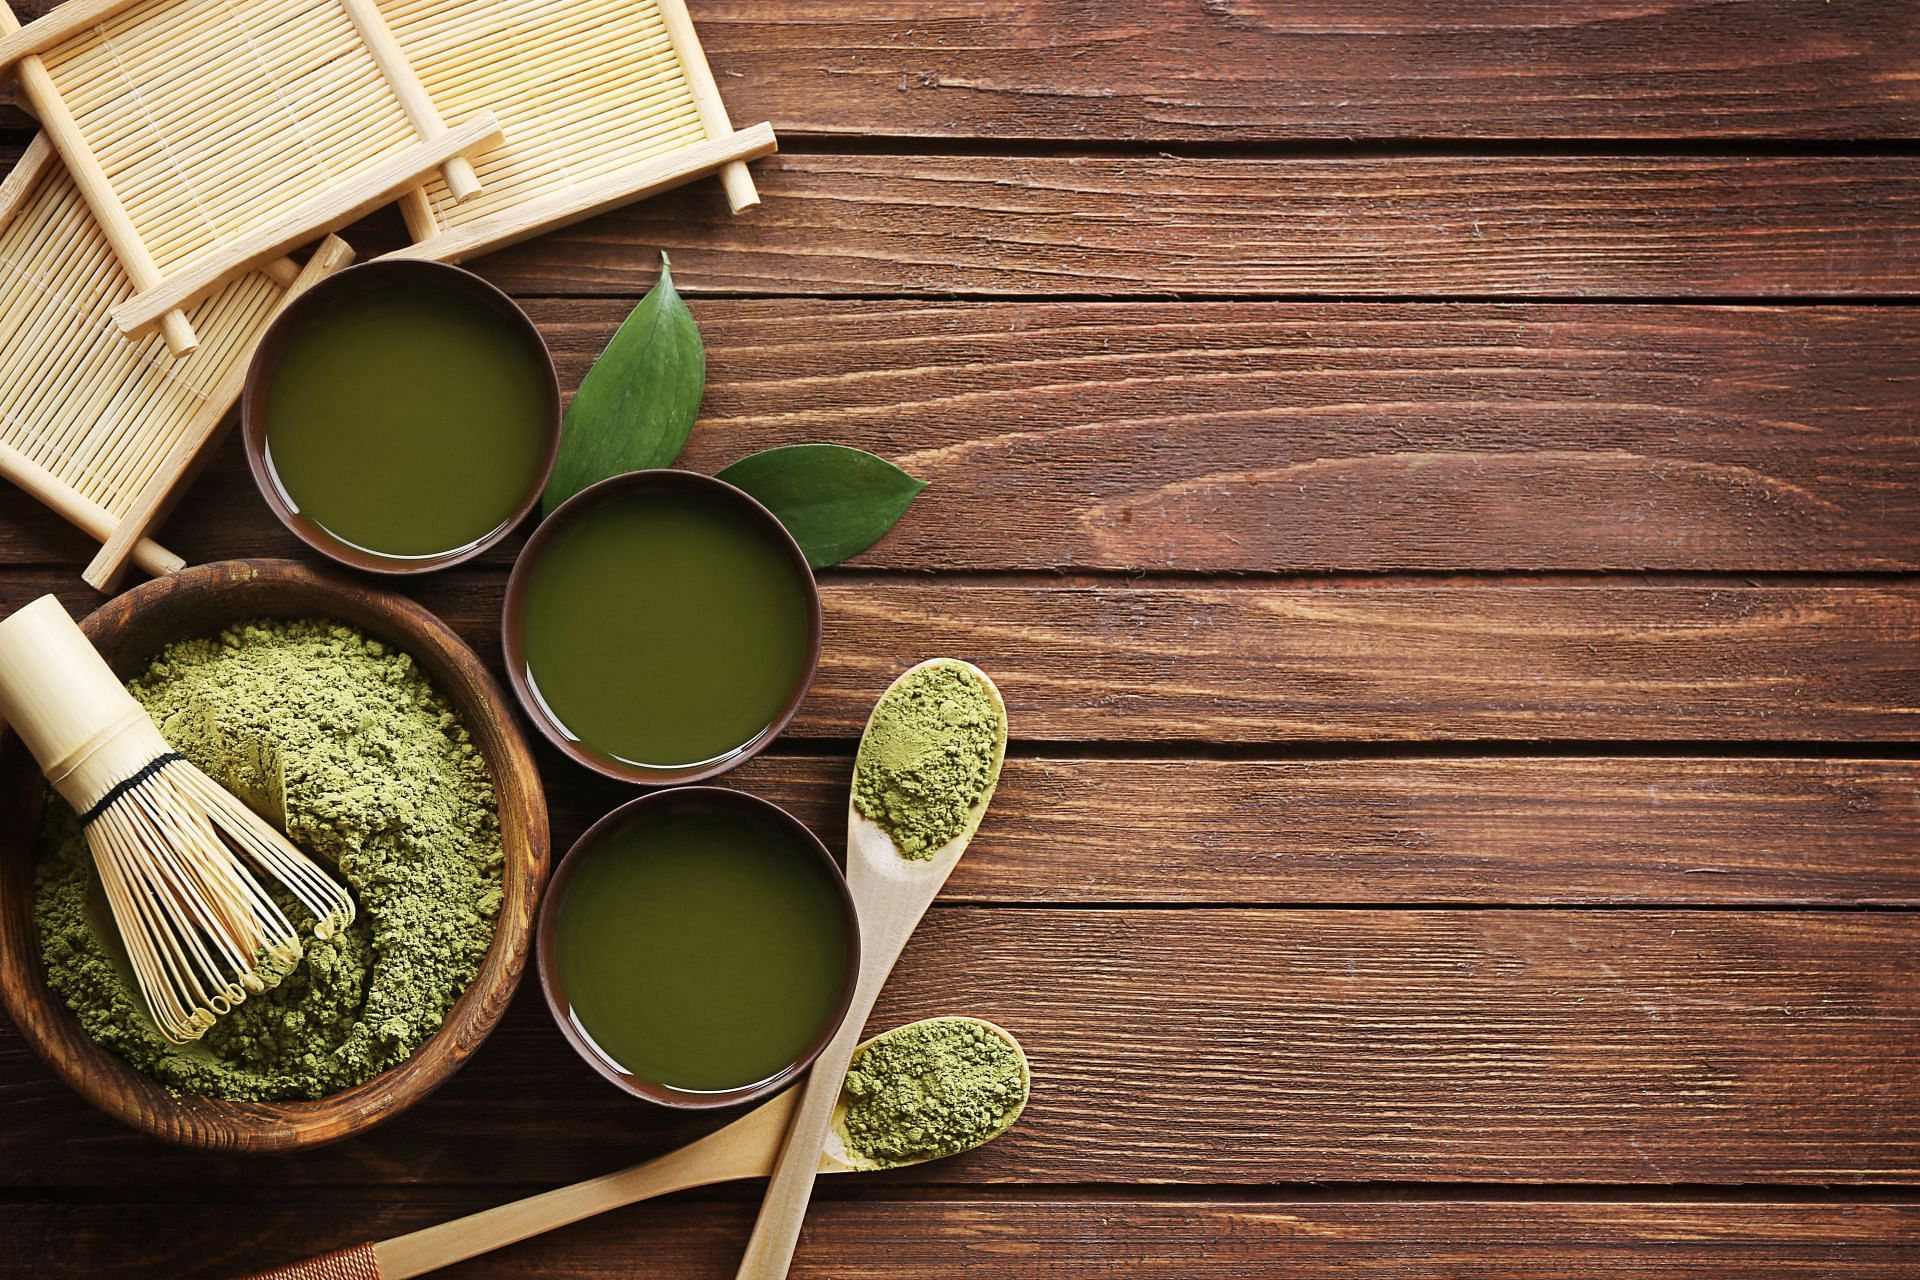 Green Tea is rich in polyphenols, which can help protect the skin from damage caused by free radicals (Image via Pexels)